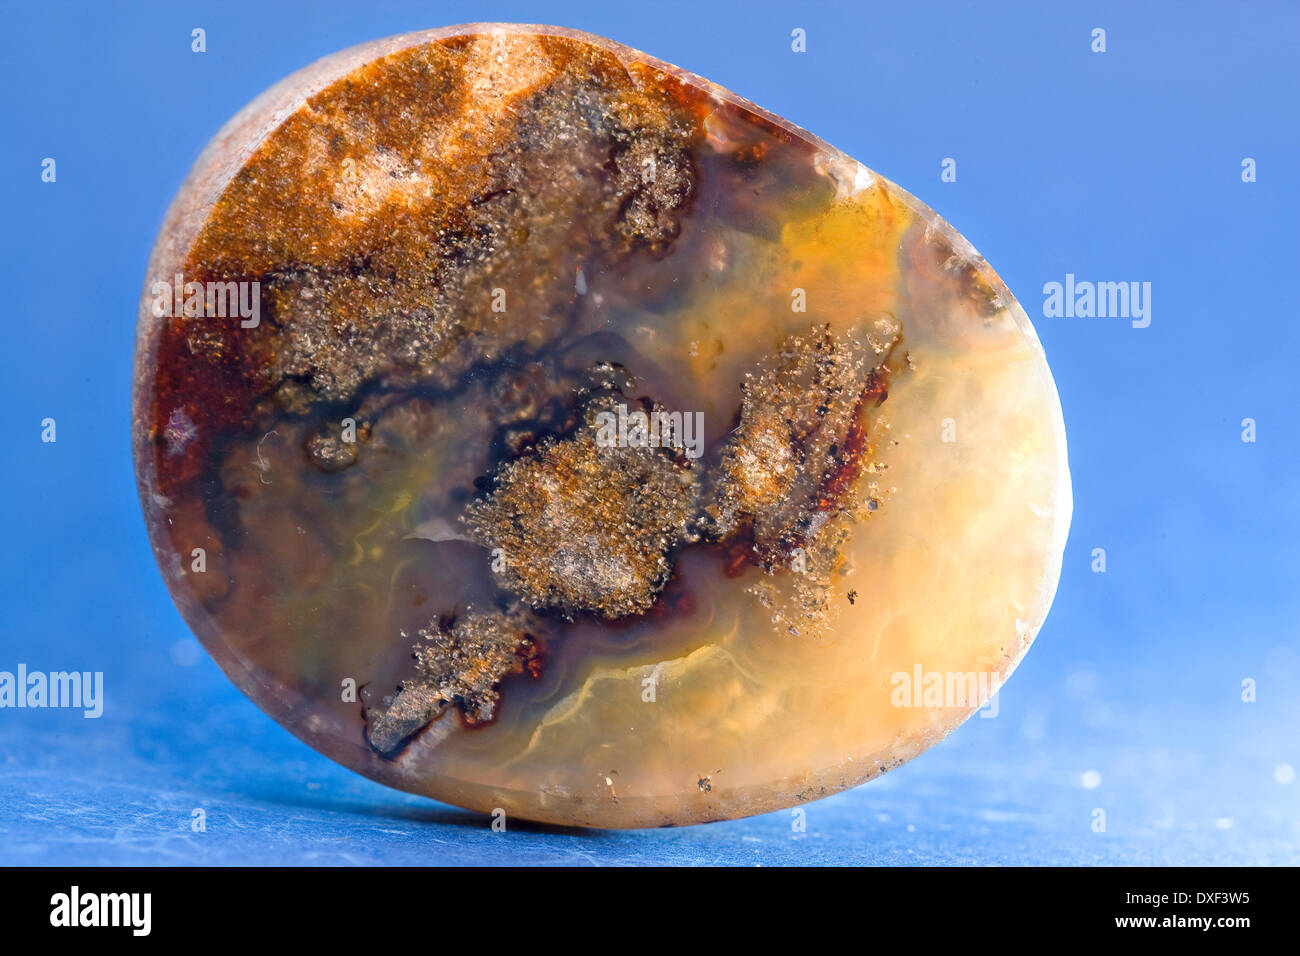 Sample of a cut and polished agate pebble. Stock Photo